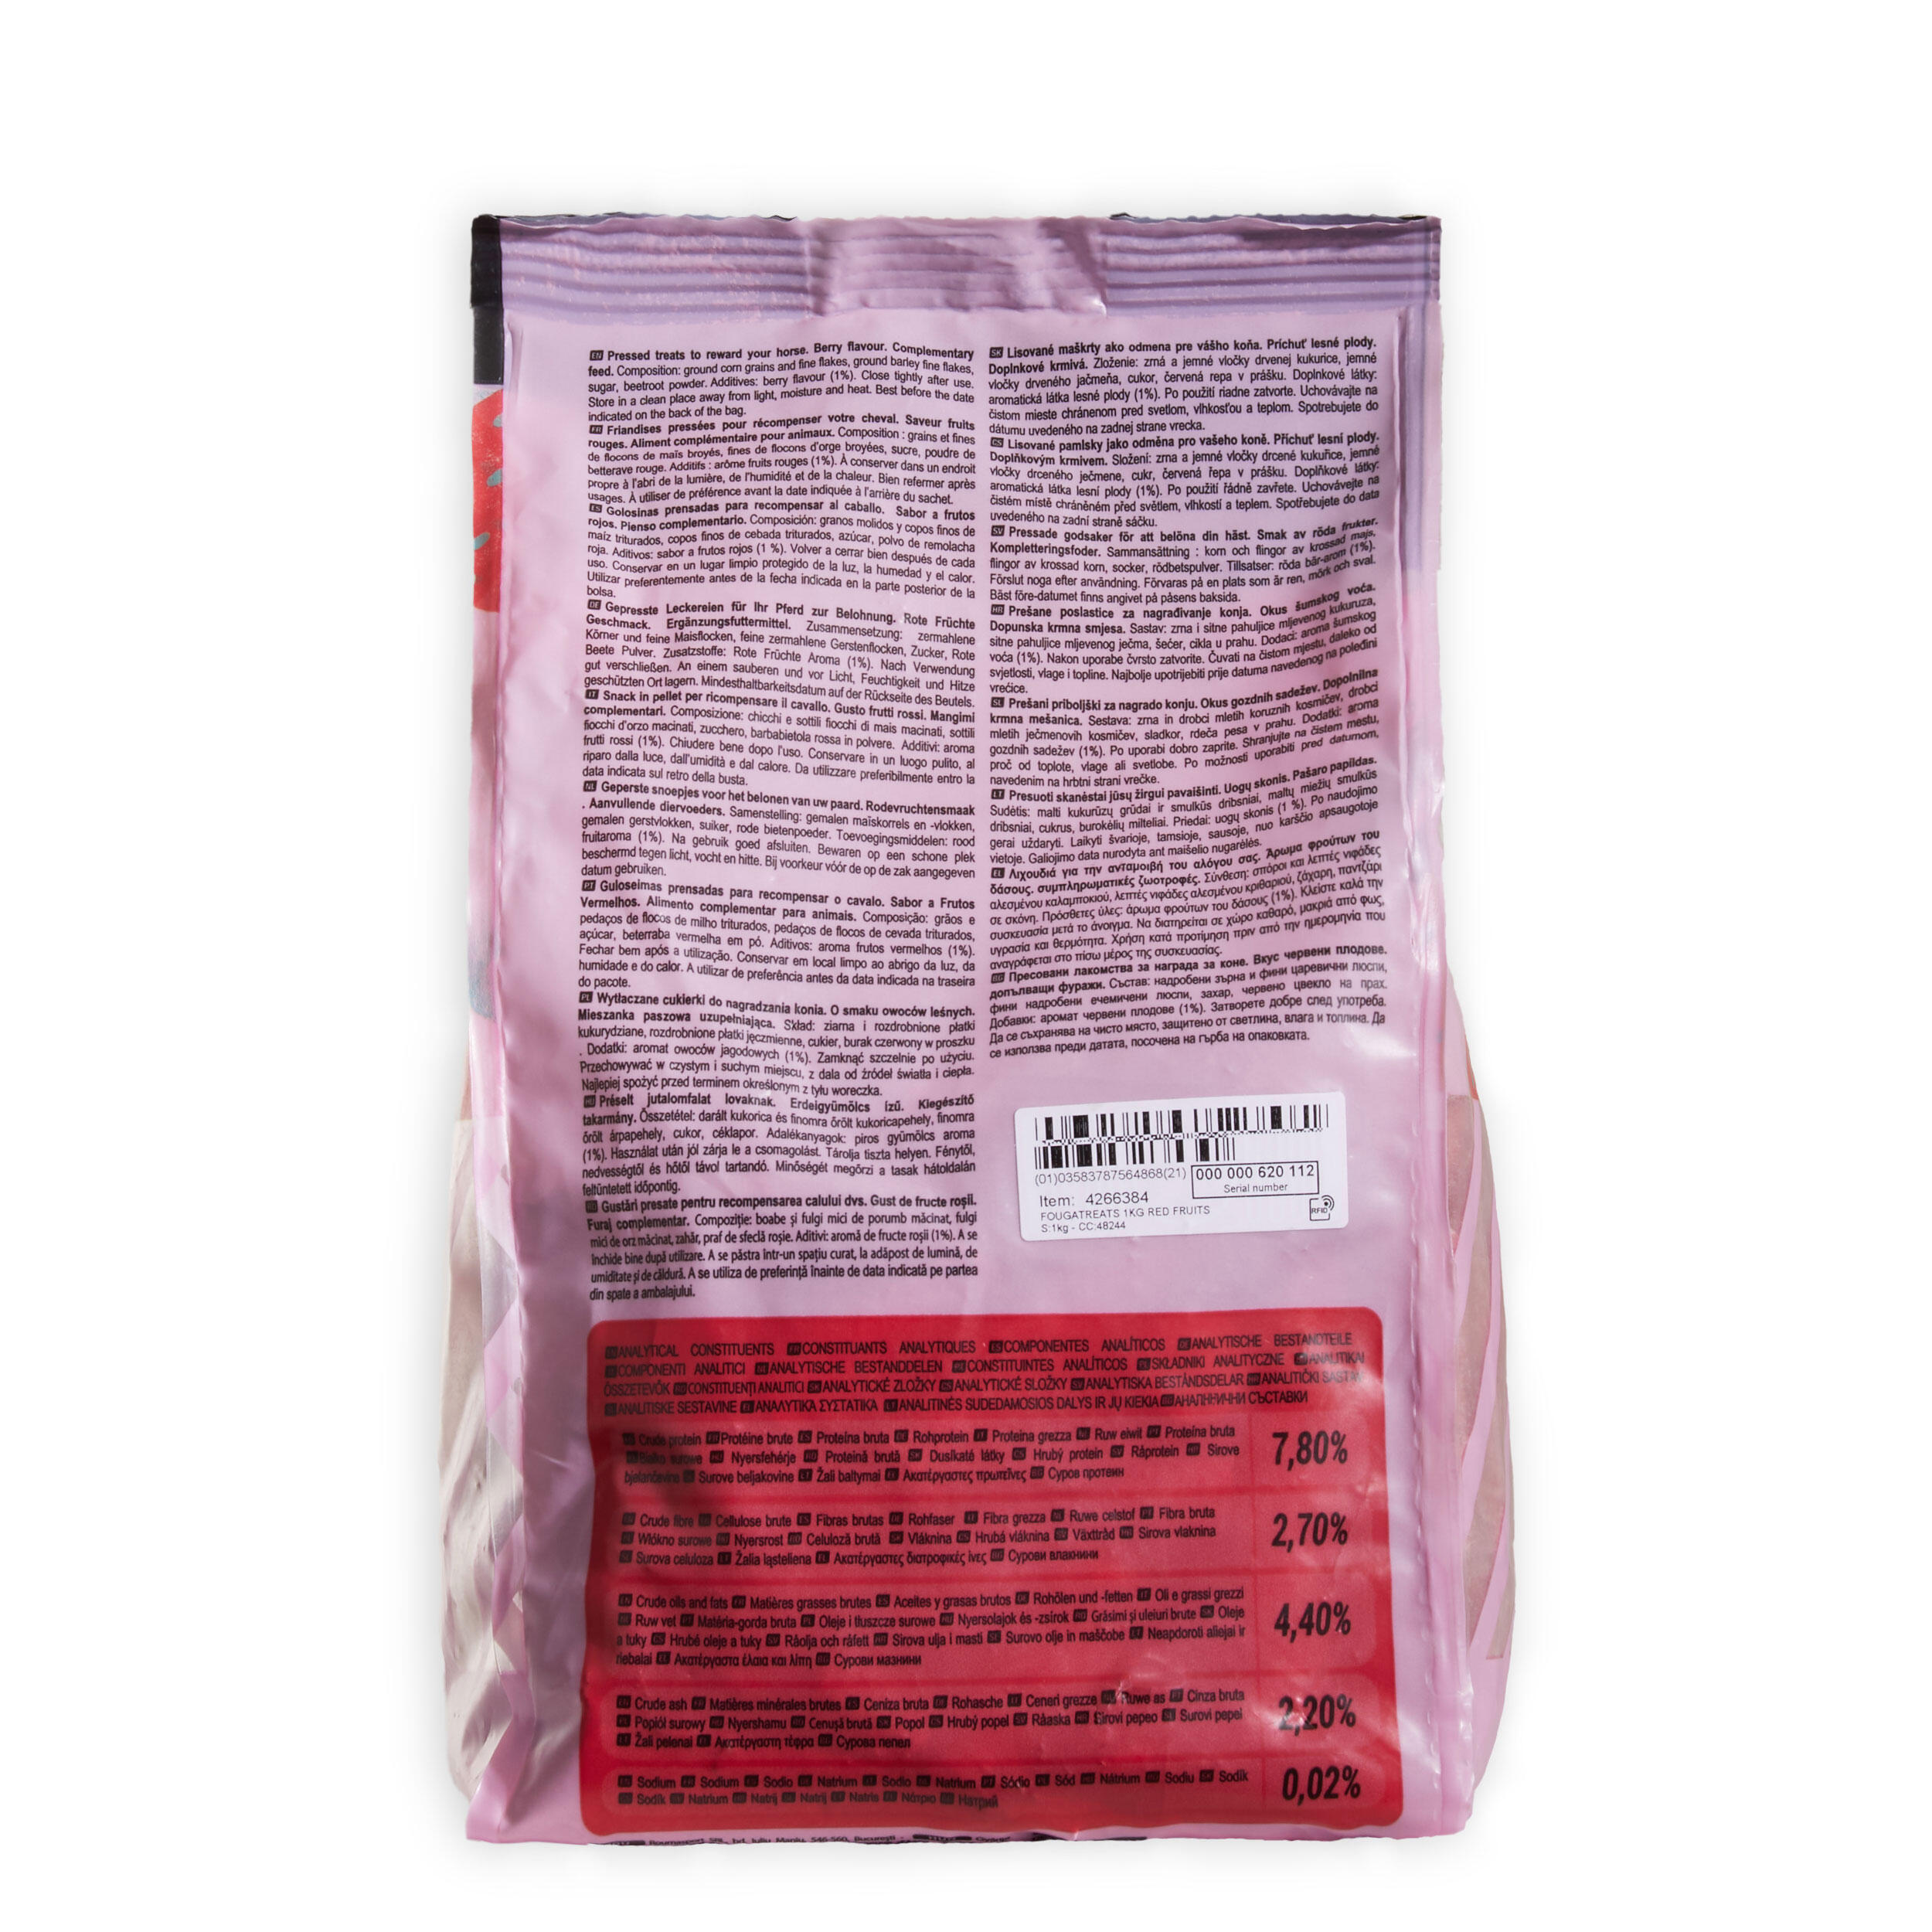 Horse Riding Treats For Horse/Pony Fougatreats 1kg - Red Berries 2/2